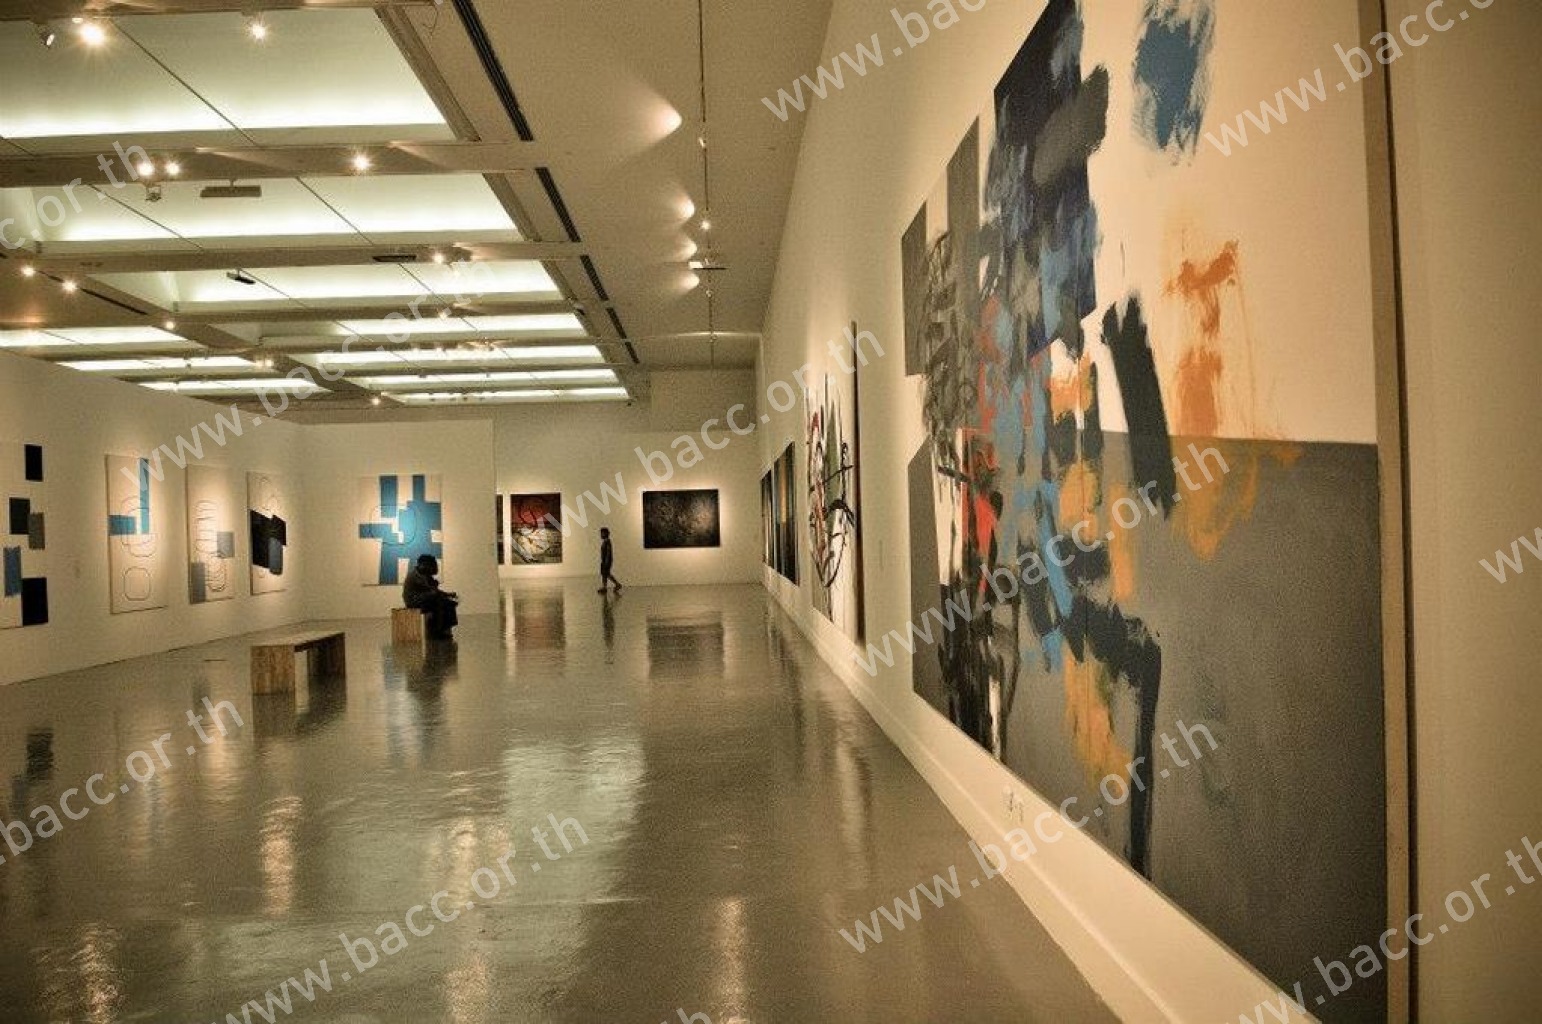 Thai Cartoons and abstract illustration exhibition